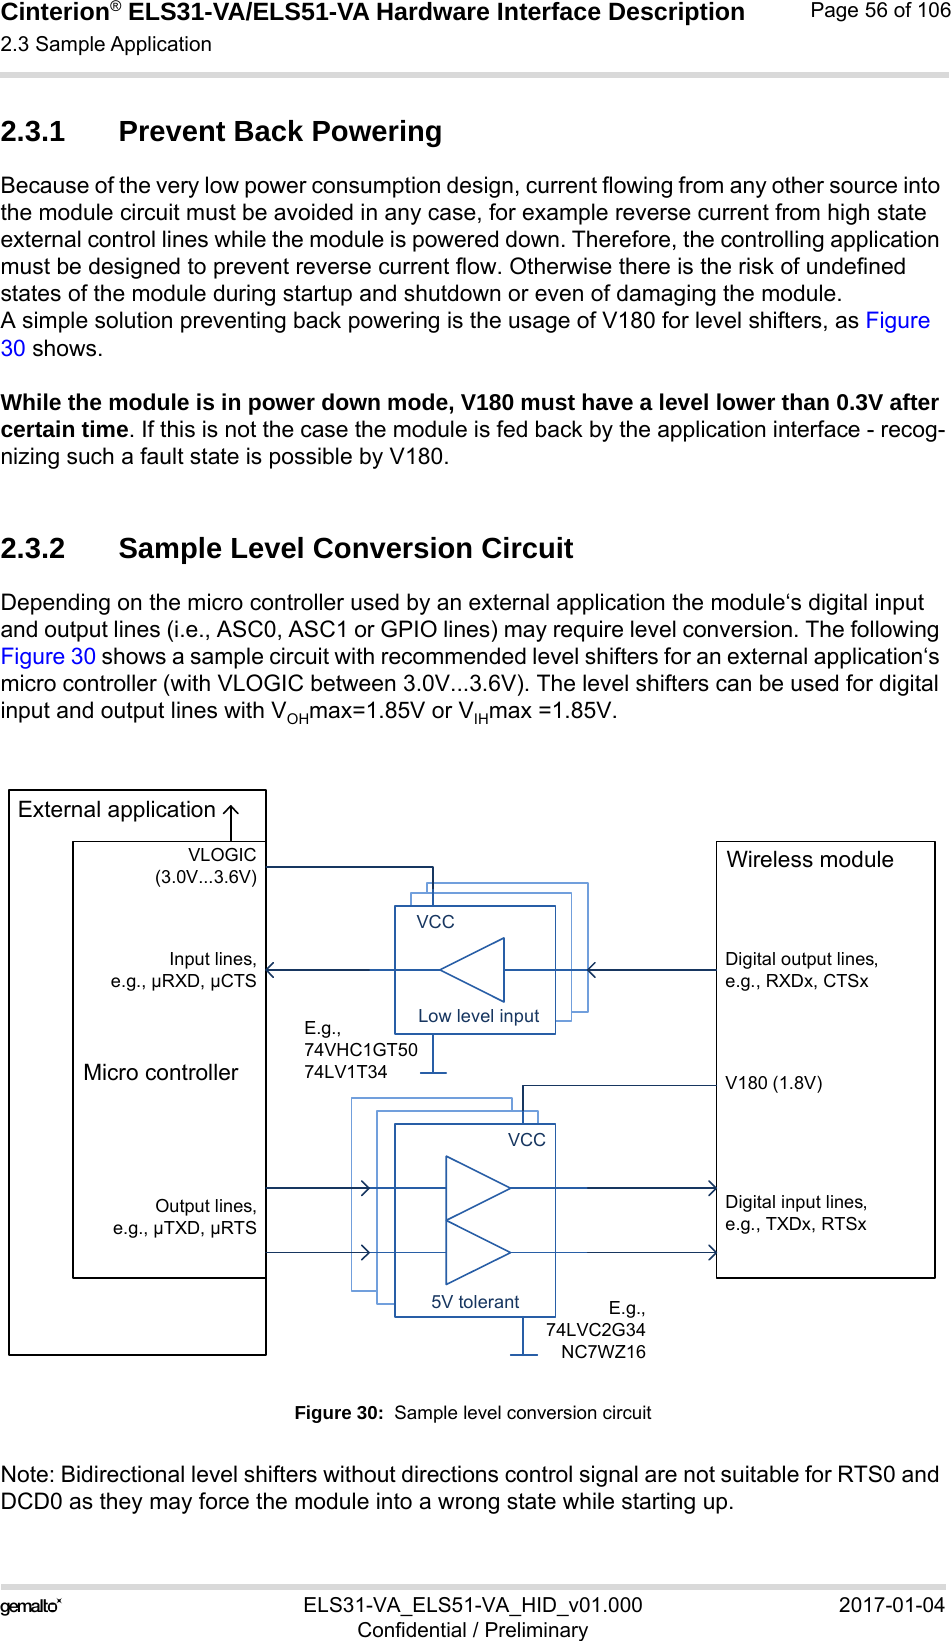 Cinterion® ELS31-VA/ELS51-VA Hardware Interface Description2.3 Sample Application56ELS31-VA_ELS51-VA_HID_v01.000 2017-01-04Confidential / PreliminaryPage 56 of 1062.3.1 Prevent Back PoweringBecause of the very low power consumption design, current flowing from any other source into the module circuit must be avoided in any case, for example reverse current from high state external control lines while the module is powered down. Therefore, the controlling application must be designed to prevent reverse current flow. Otherwise there is the risk of undefined states of the module during startup and shutdown or even of damaging the module.A simple solution preventing back powering is the usage of V180 for level shifters, as Figure 30 shows.While the module is in power down mode, V180 must have a level lower than 0.3V after certain time. If this is not the case the module is fed back by the application interface - recog-nizing such a fault state is possible by V180.2.3.2 Sample Level Conversion CircuitDepending on the micro controller used by an external application the module‘s digital input and output lines (i.e., ASC0, ASC1 or GPIO lines) may require level conversion. The following Figure 30 shows a sample circuit with recommended level shifters for an external application‘s micro controller (with VLOGIC between 3.0V...3.6V). The level shifters can be used for digital input and output lines with VOHmax=1.85V or VIHmax =1.85V.Figure 30:  Sample level conversion circuitNote: Bidirectional level shifters without directions control signal are not suitable for RTS0 and DCD0 as they may force the module into a wrong state while starting up.5V tolerarantLow level inputLow level inputLow level inputVCC5V tolerantVCCE.g.,74VHC1GT5074LV1T34E.g.,74LVC2G34NC7WZ16External applicationMicro controllerVLOGIC(3.0V...3.6V)Input lines,e.g., µRXD, µCTSOutput lines,e.g., µTXD, µRTSV180 (1.8V)Digital output lines,e.g., RXDx, CTSxWireless moduleDigital input lines,e.g., TXDx, RTSx